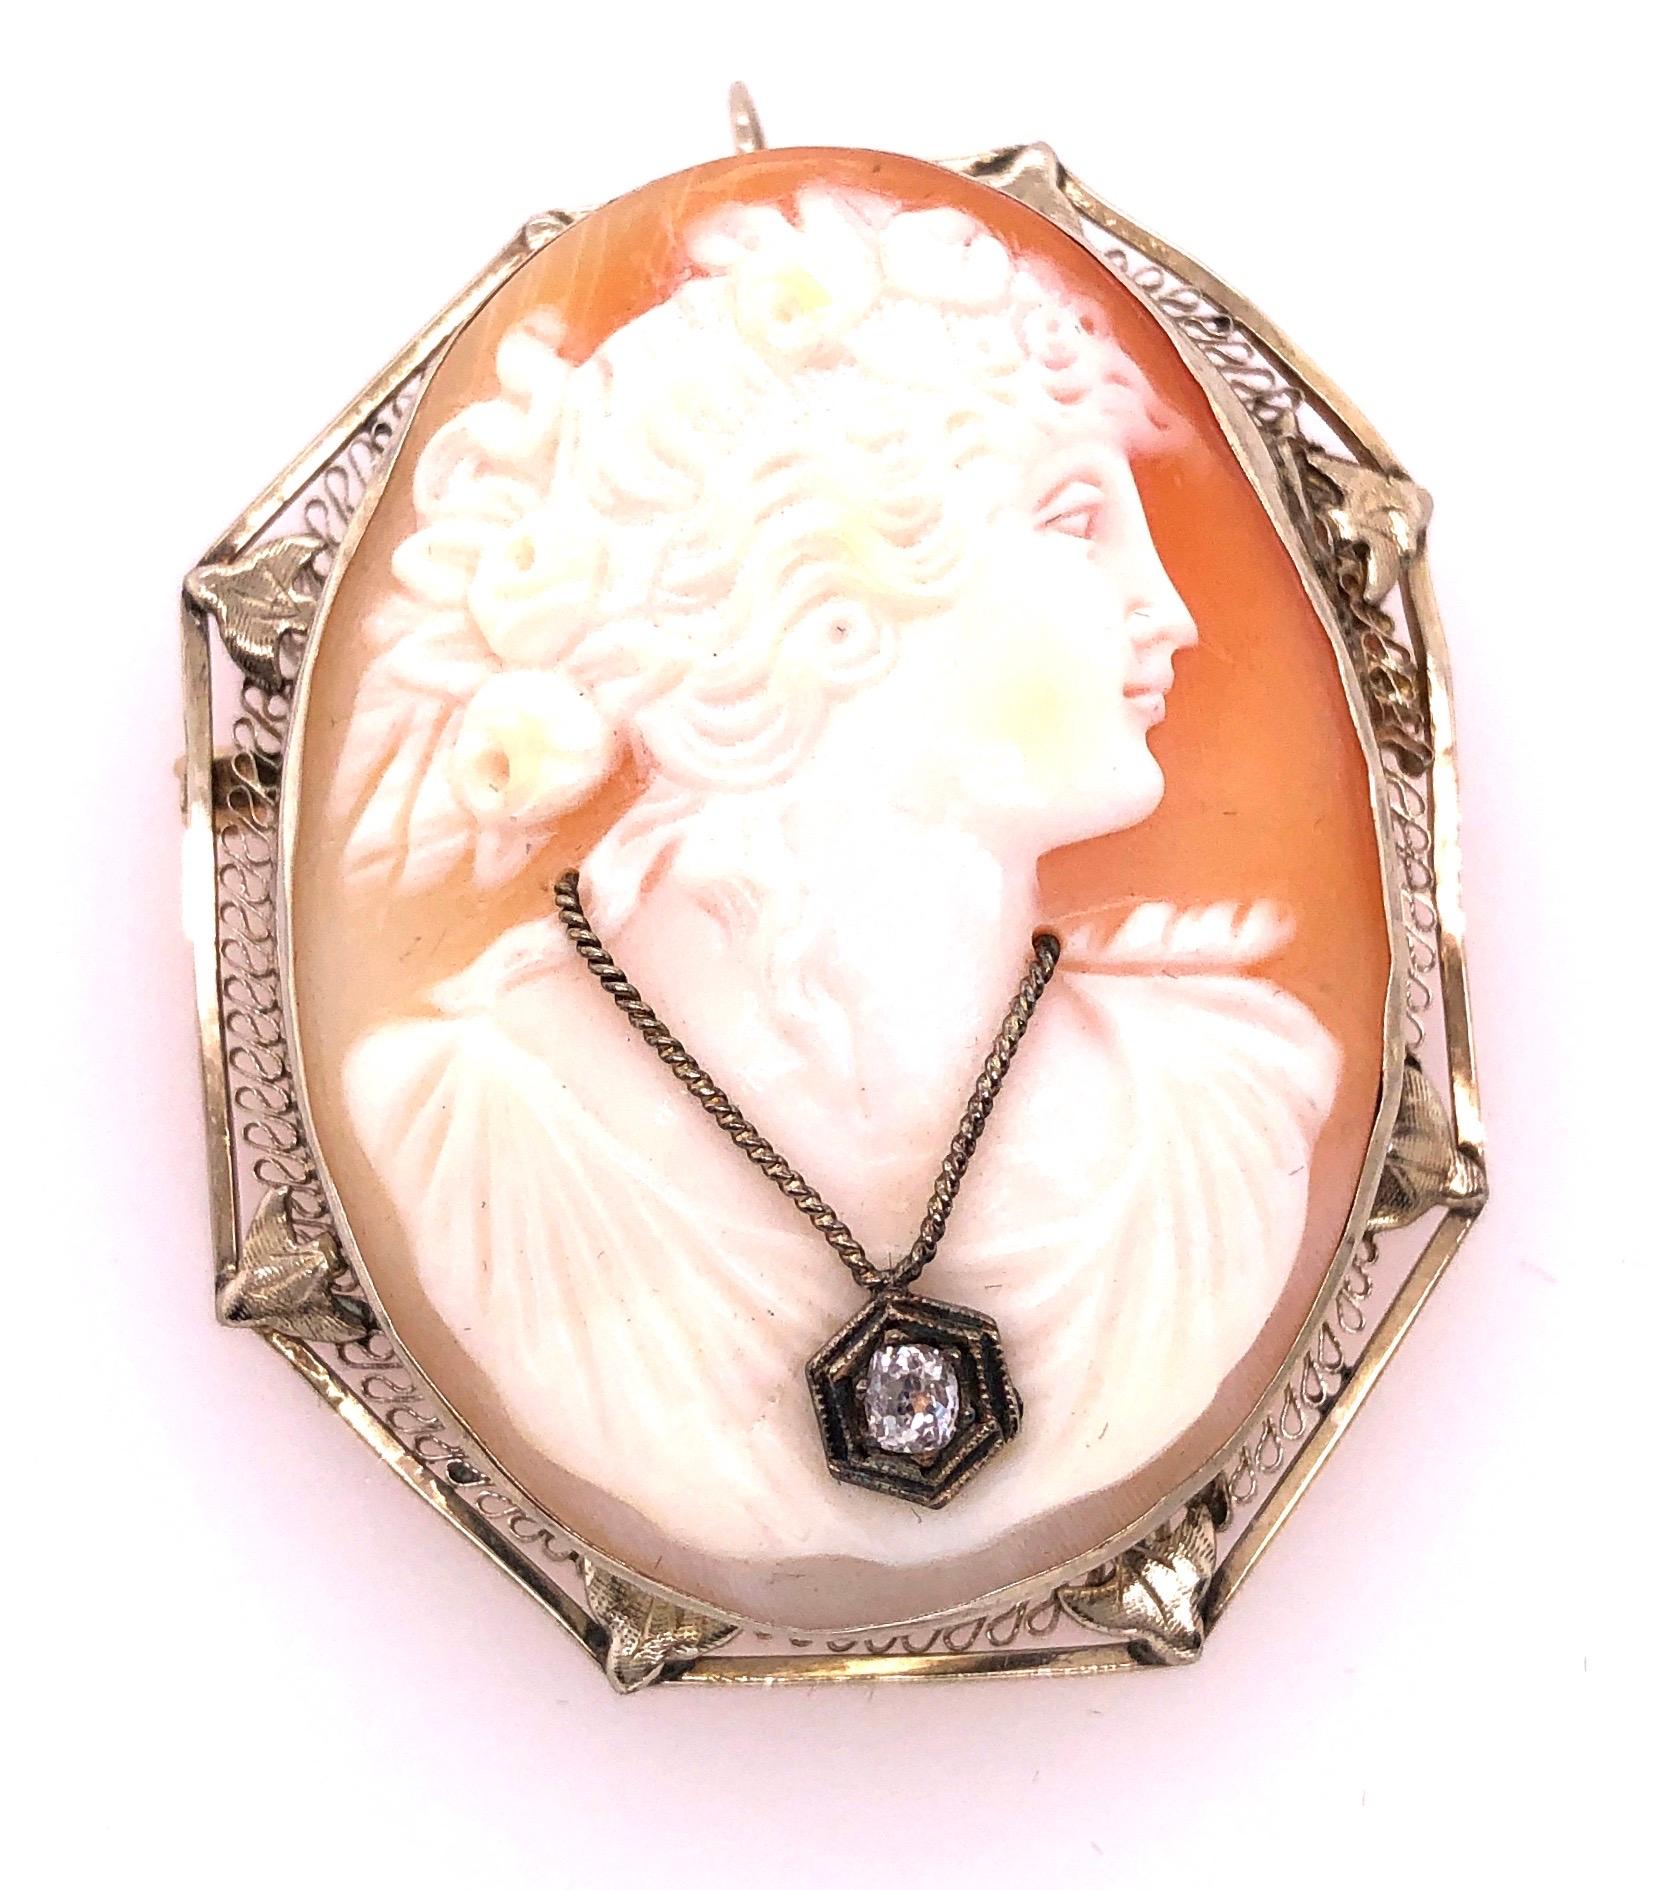 14 Karat White Gold Cameo Brooch and Pendant Woman Profile With Diamond Necklace
11.8 grams total weight.
Height: 50 mm
Width: 35 mm